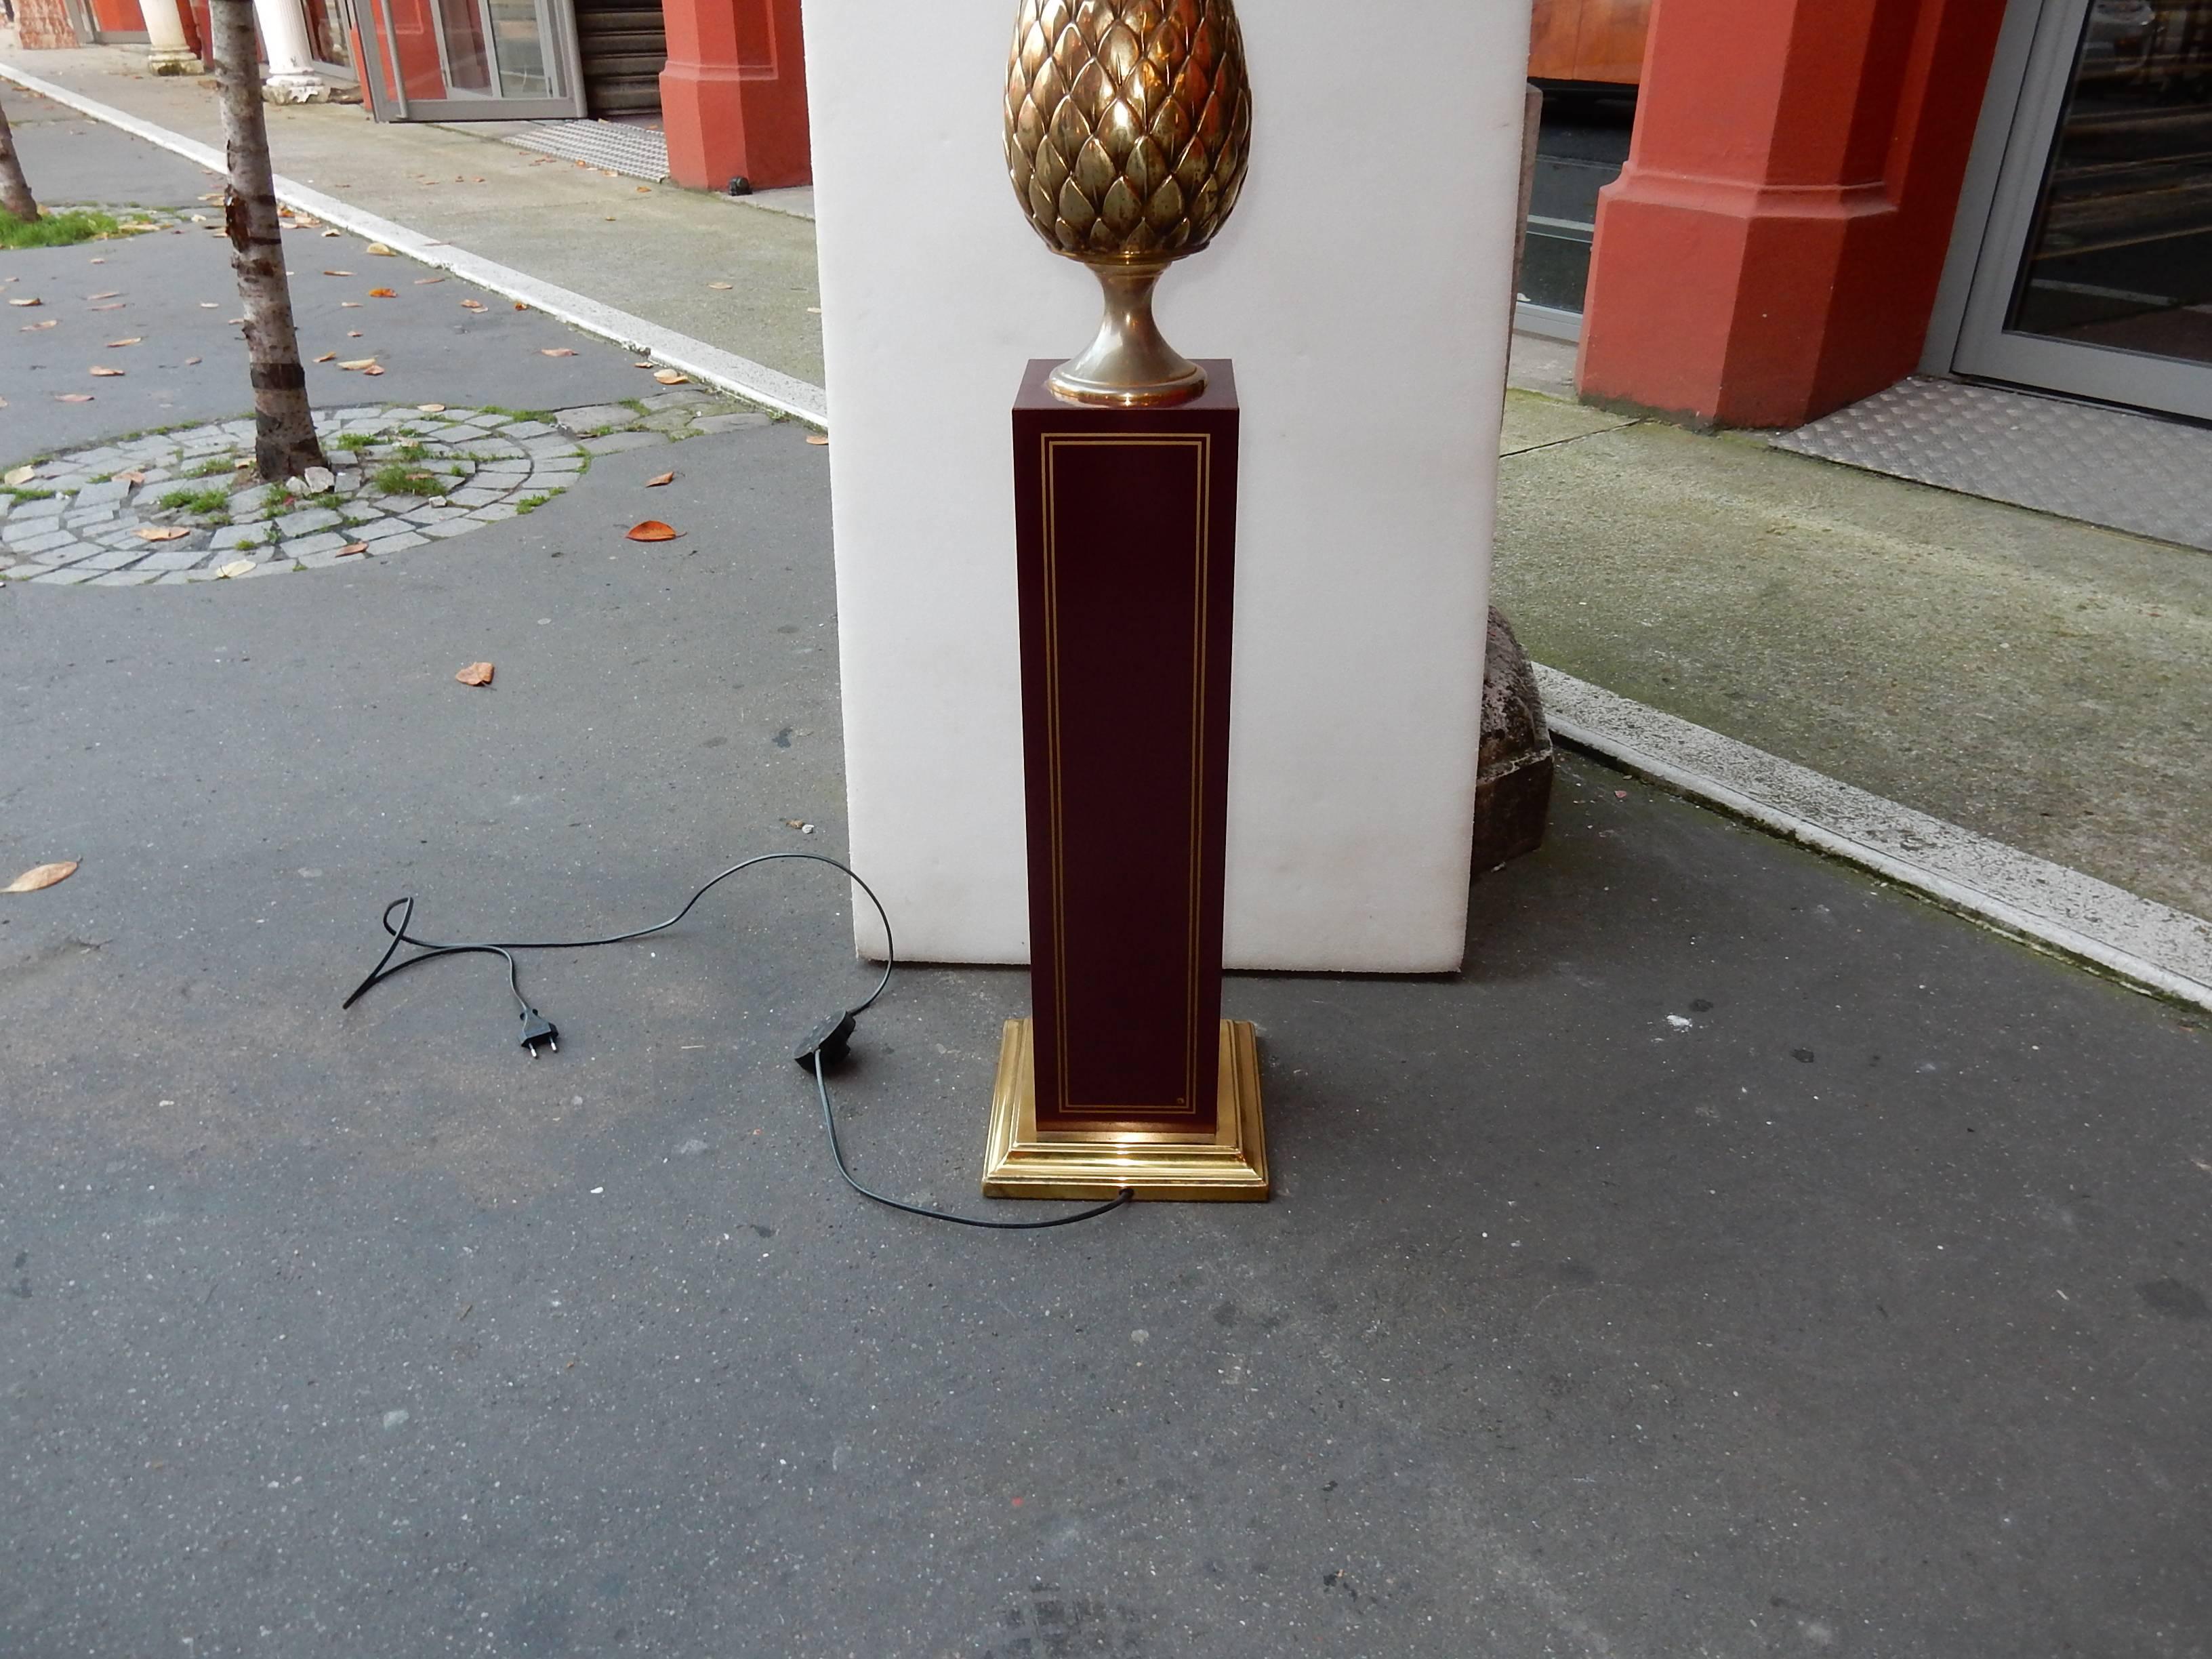 Floor lamp bases in brass and wooden girdle lacquered, pineapple cast iron d art, two bulbs, circa on 1970, in good condition. Measures: Height of fut: 64 cm lampshade: low diameter 55 and diameter high 36 cm, height 42 cm.